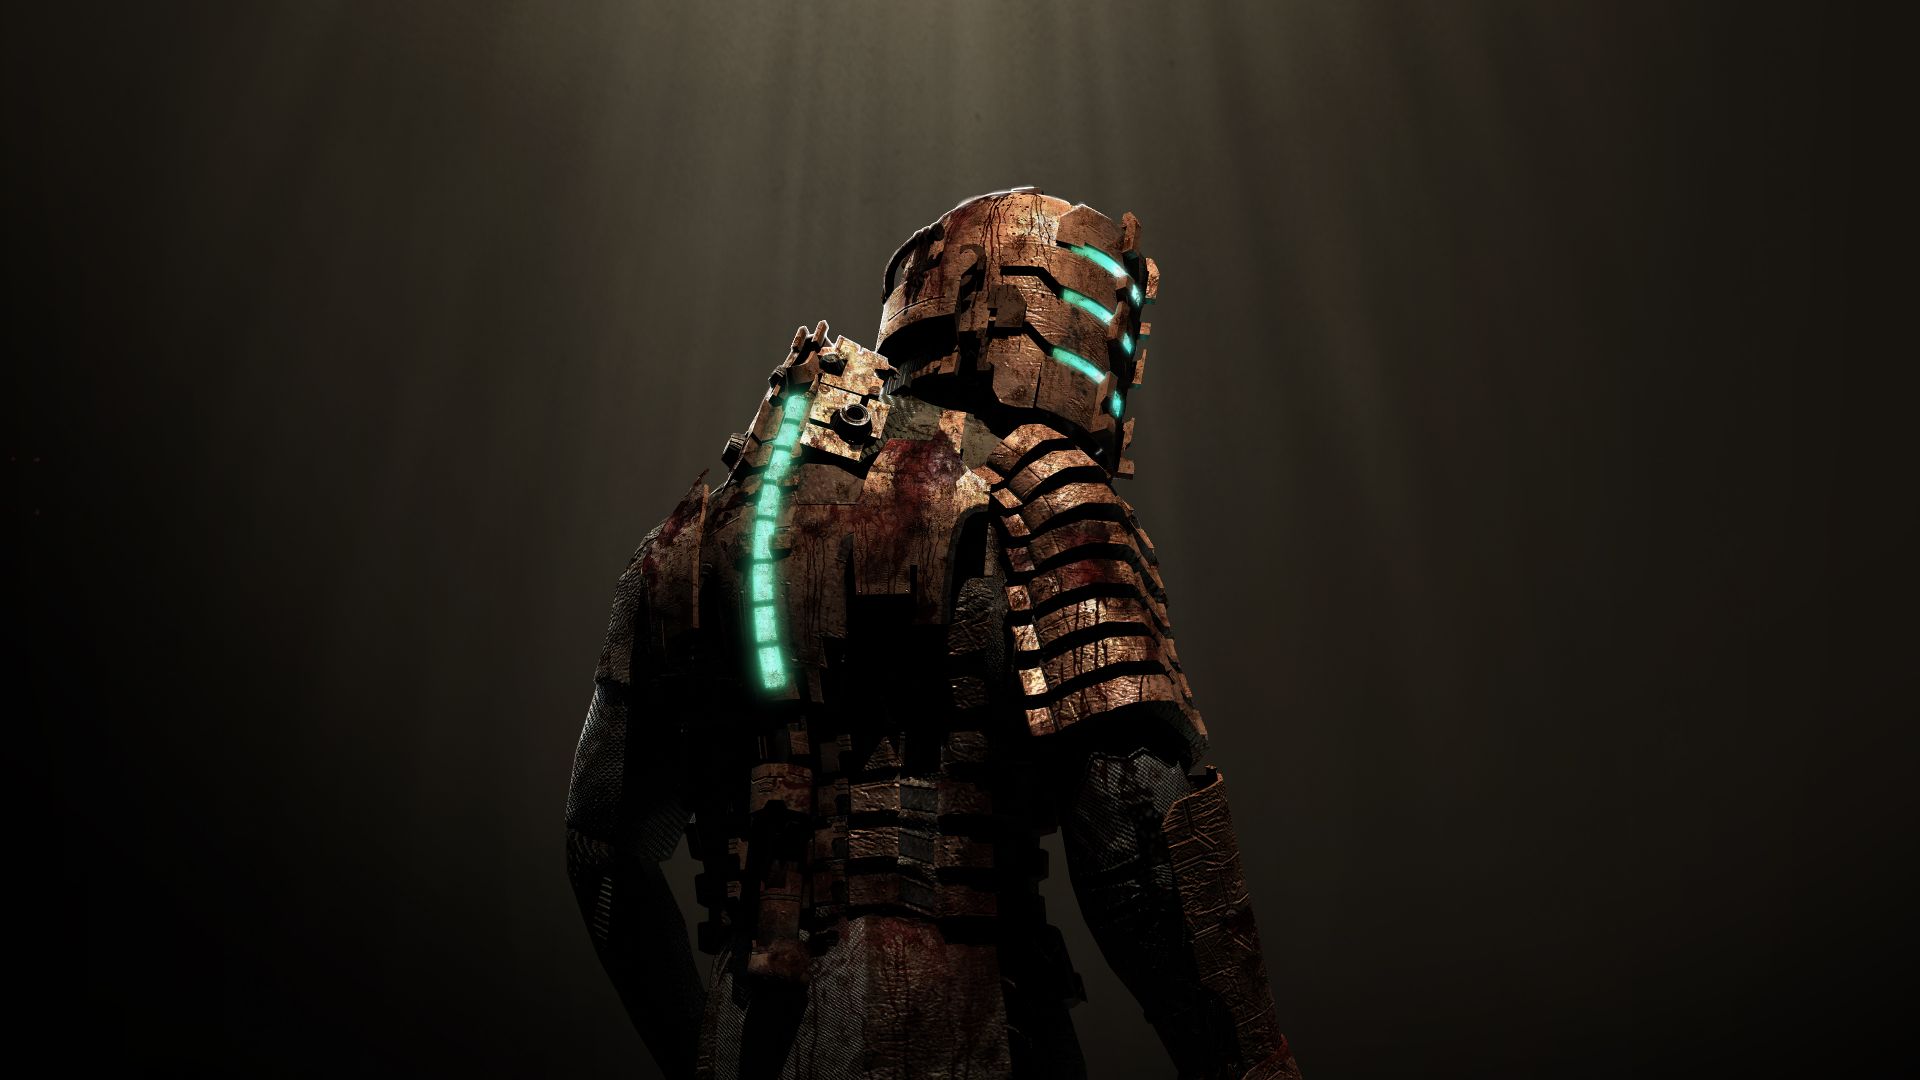 dead space remake circle codes